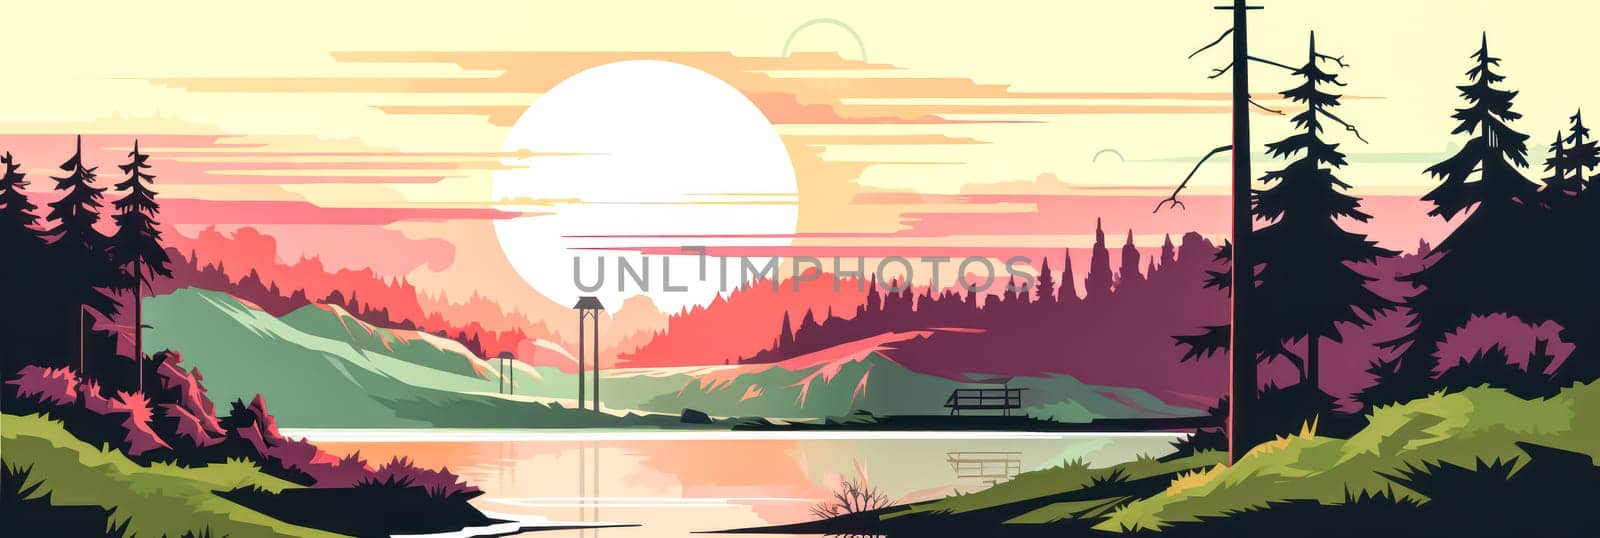 Camping in the mountains sunset scene. Standard illustration capturing the serene beauty of a mountainous camping experience.